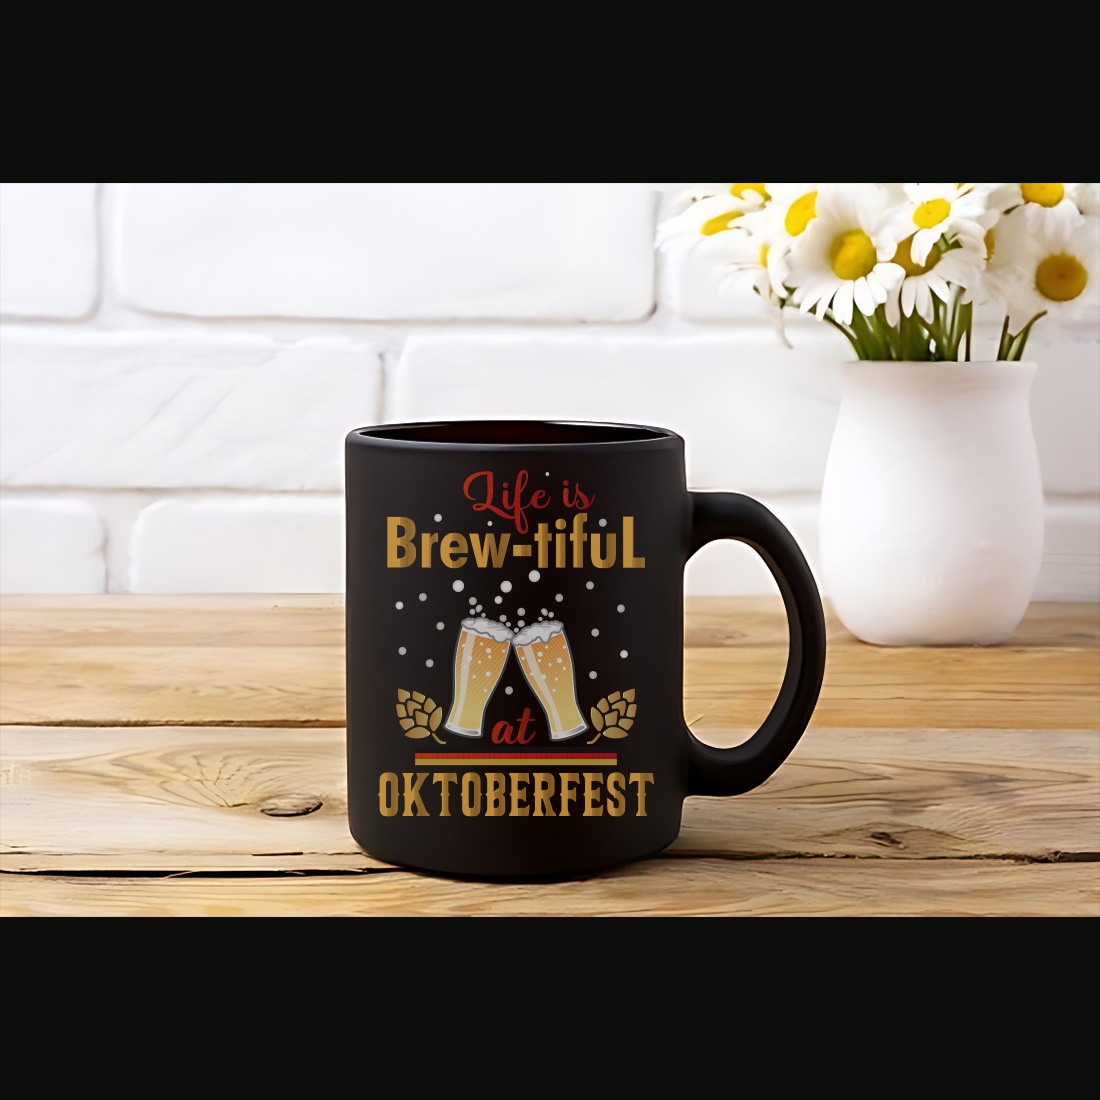 Life is brewtiful at oktoberfest typography t shirt design preview image.